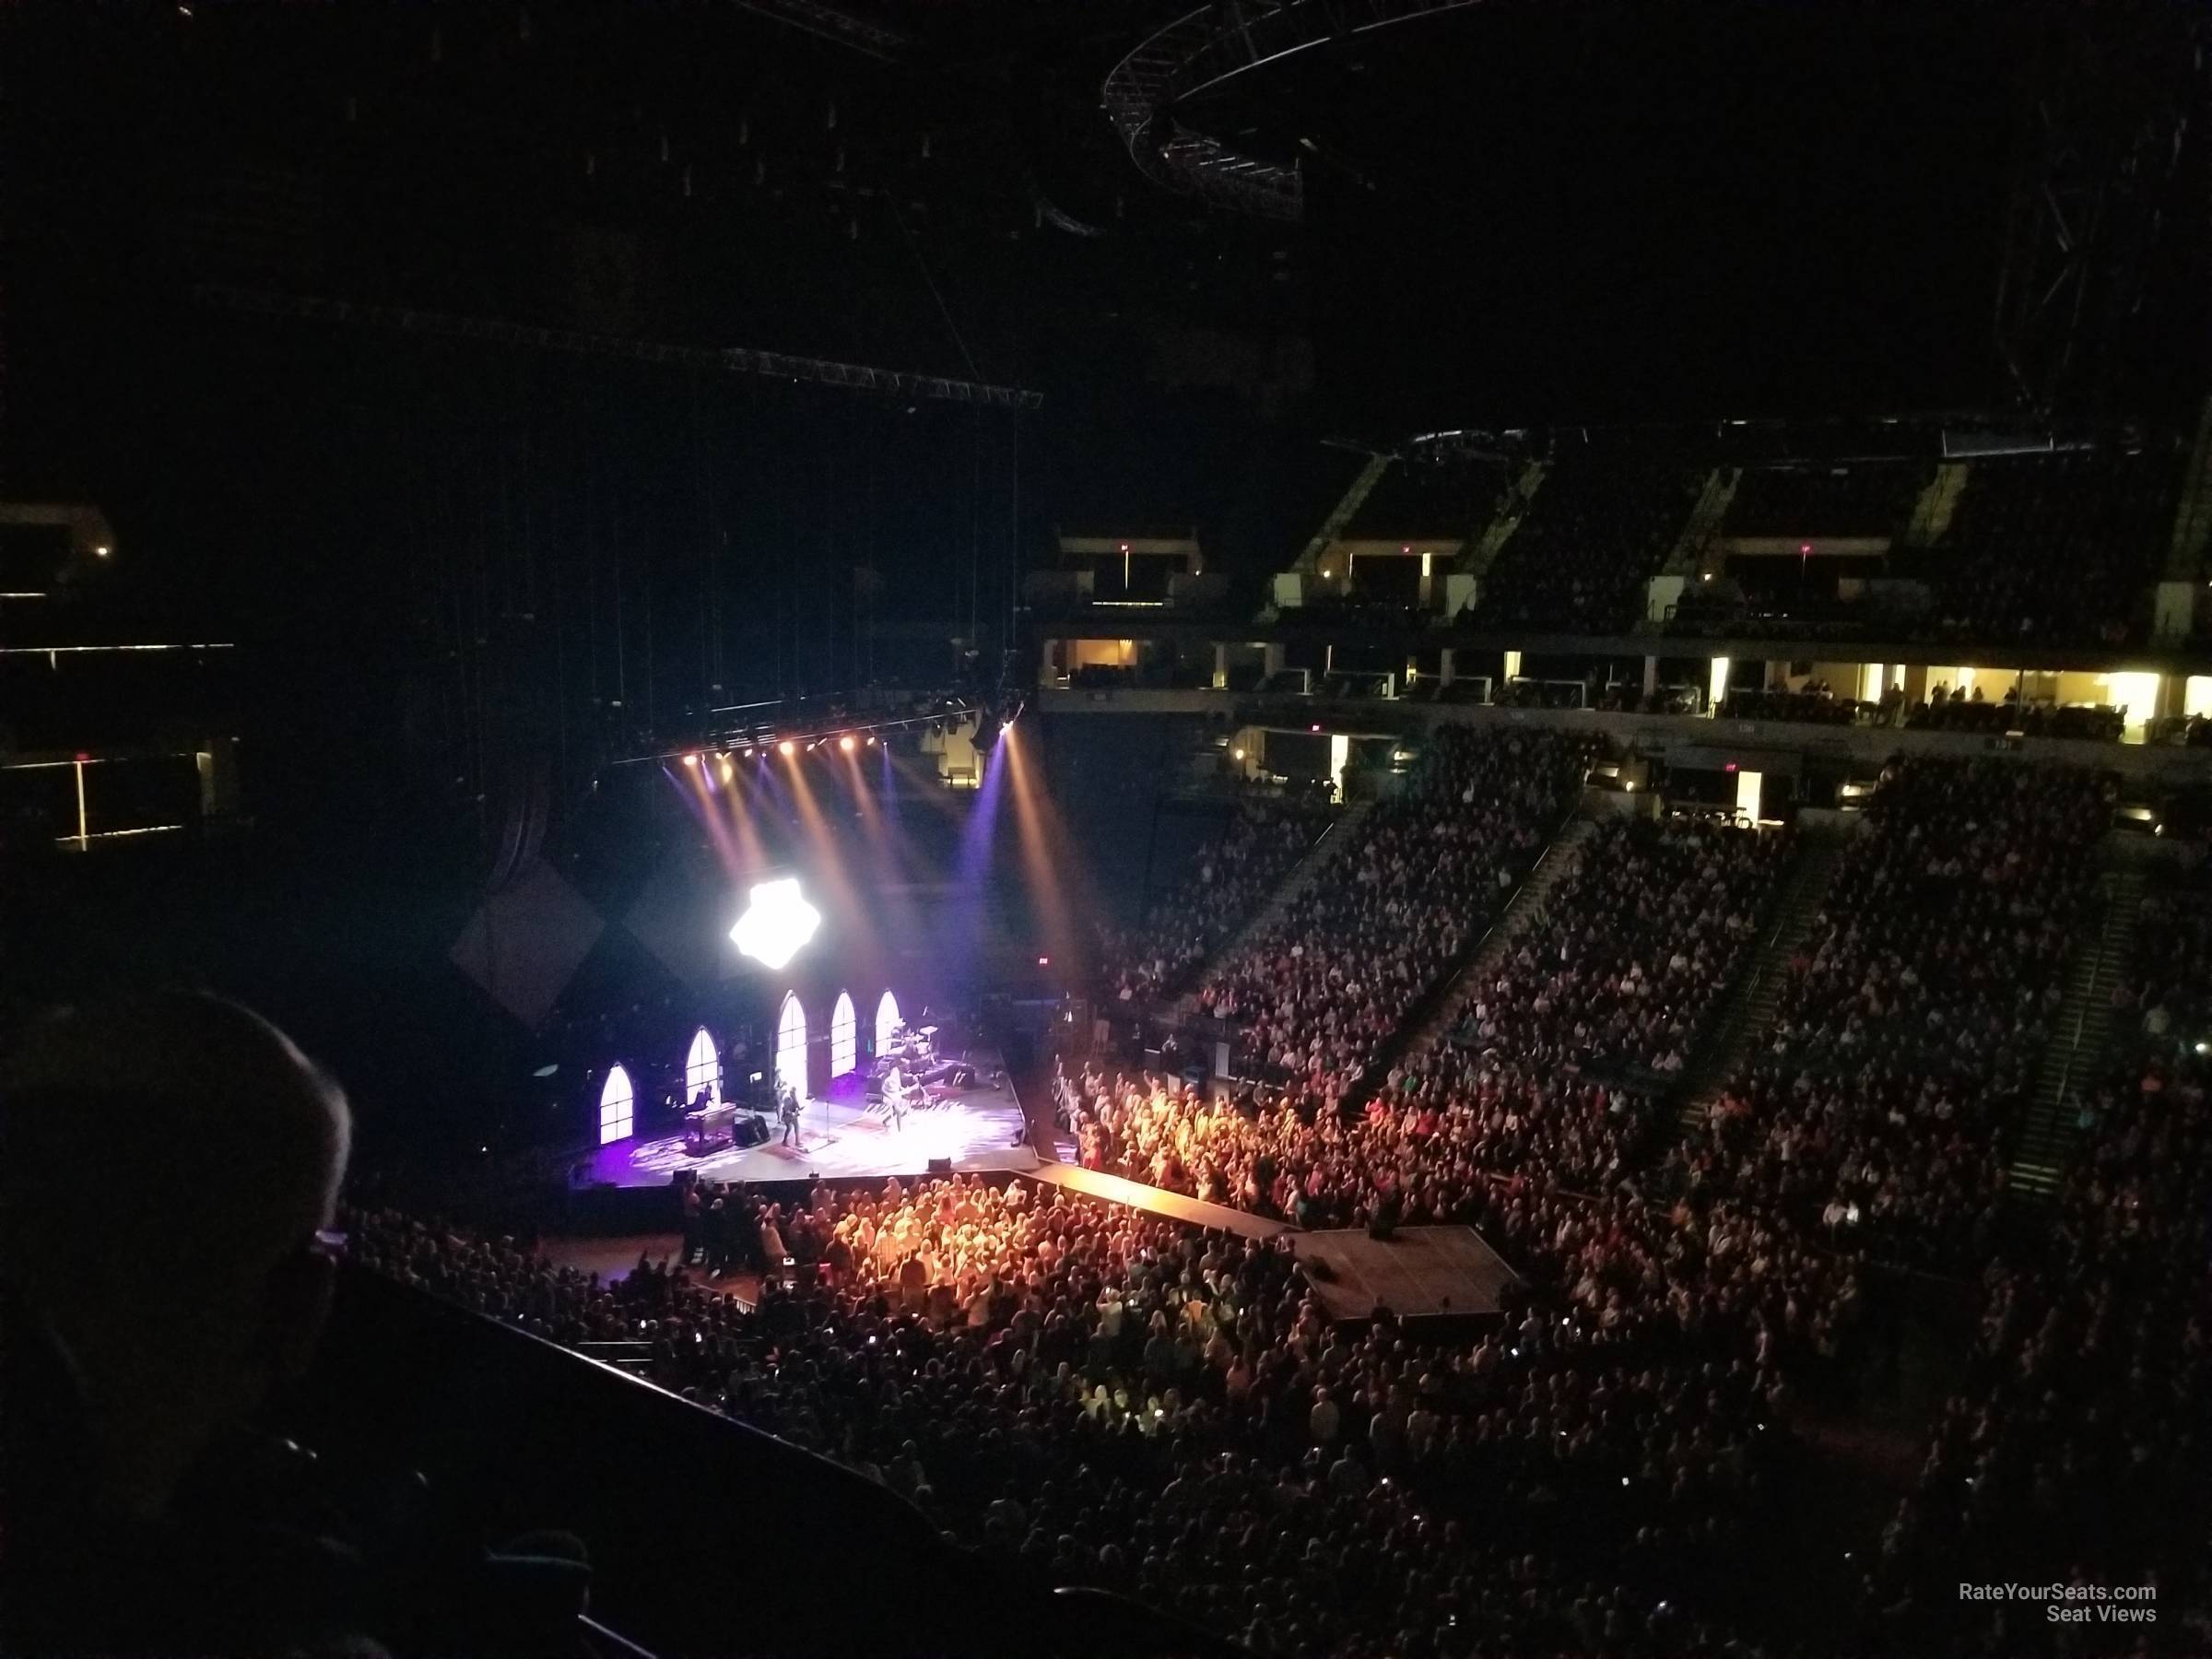 section 210, row c seat view  for concert - target center